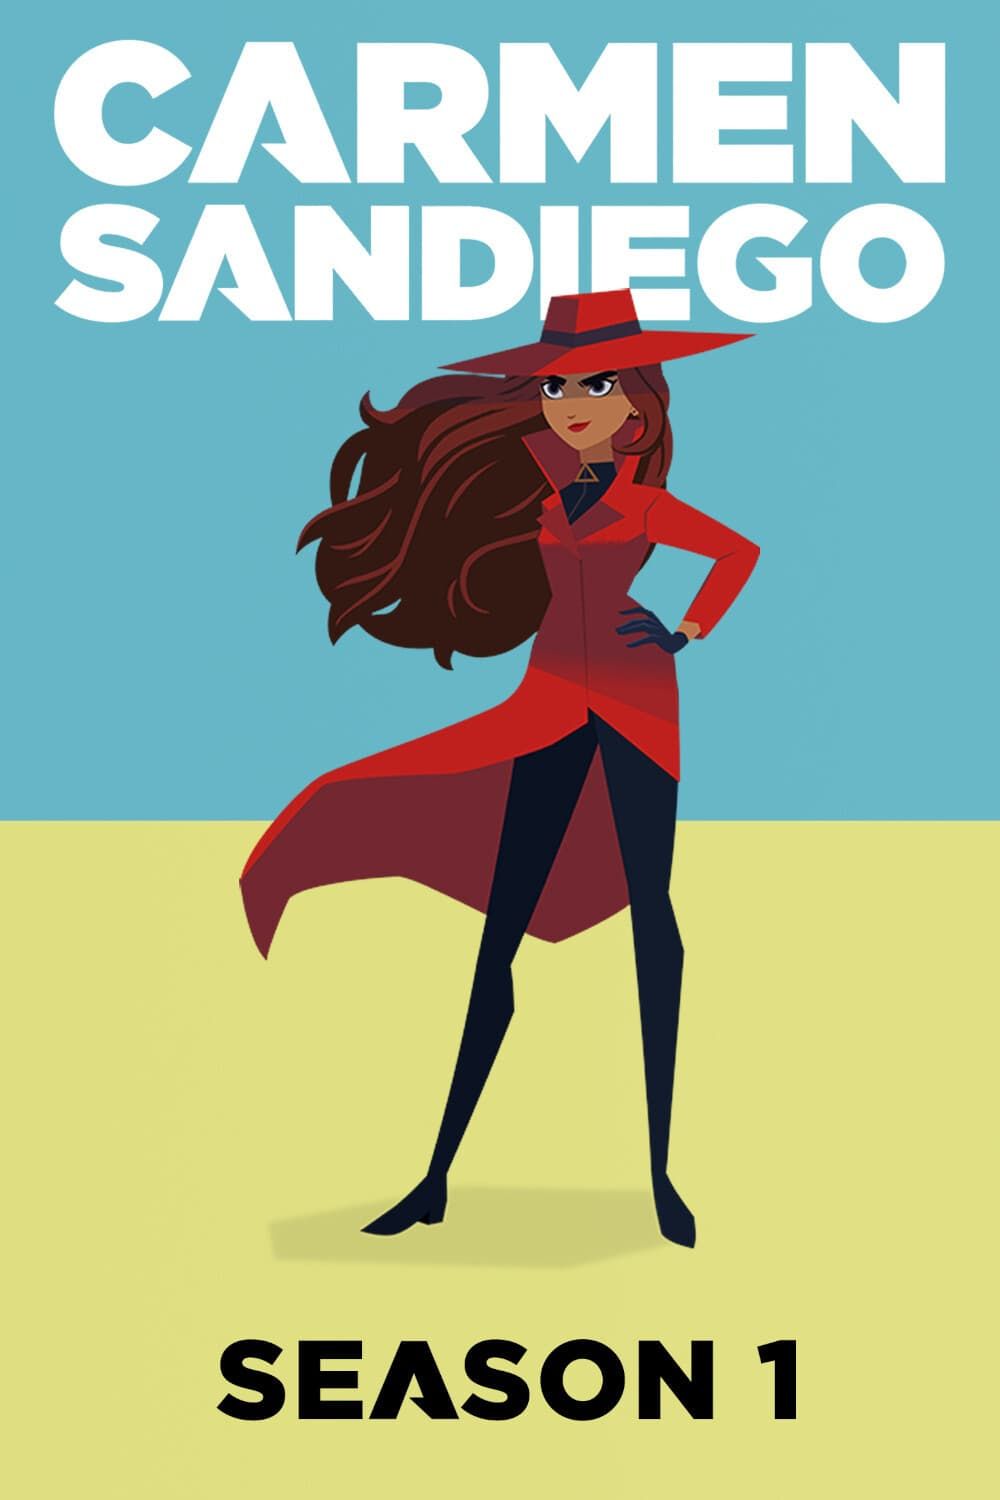 Download Carmen Sandiego's Great Chase Through Time (Windows) - My